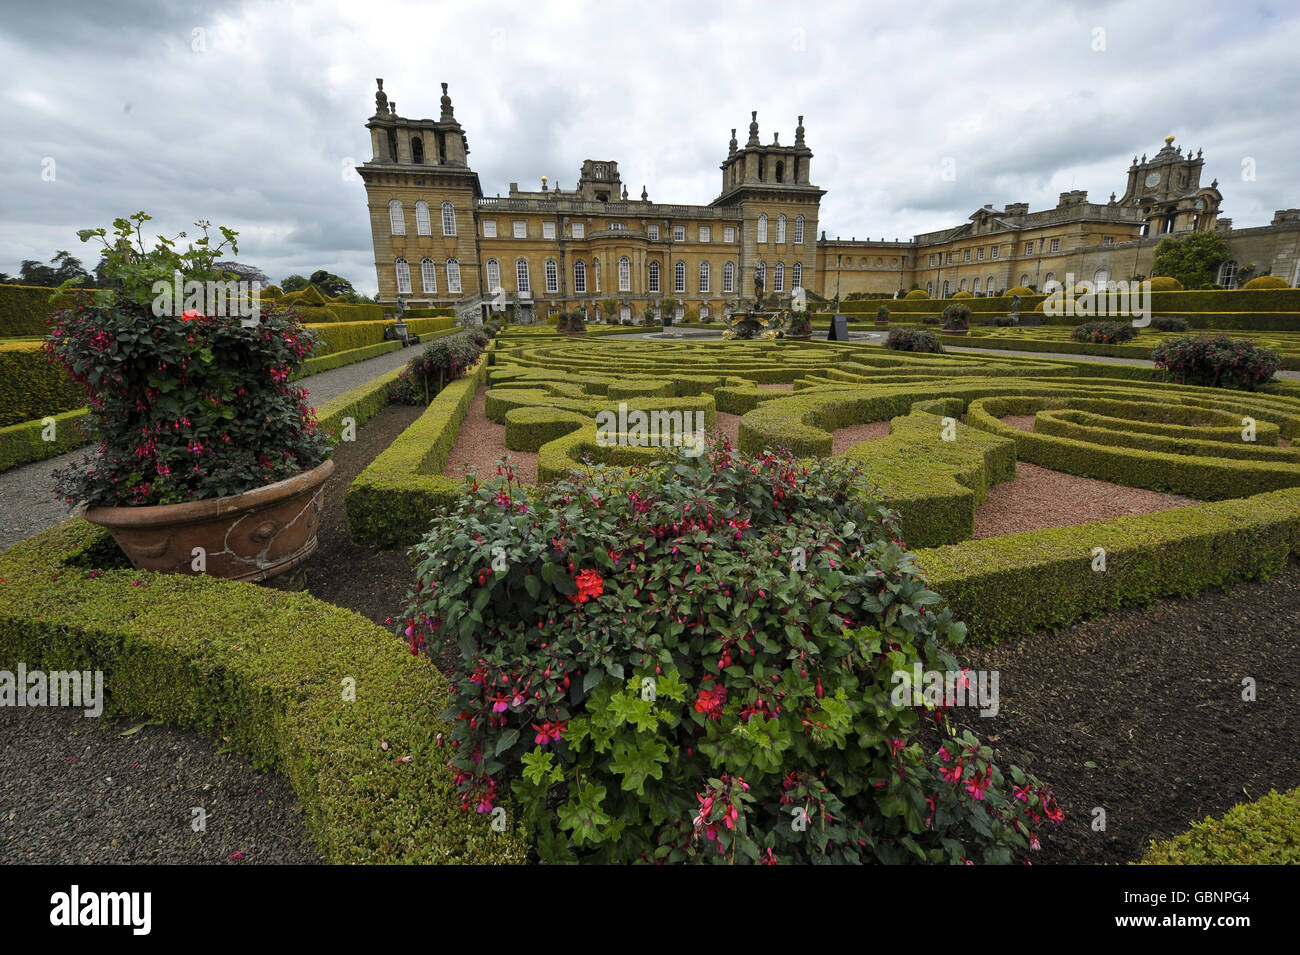 The Duke of Marlborough's private Italian Garden is pictured at Blenheim palace where a plaque is unveilled in celebration of the palace winning the Garden of the Year award Stock Photo